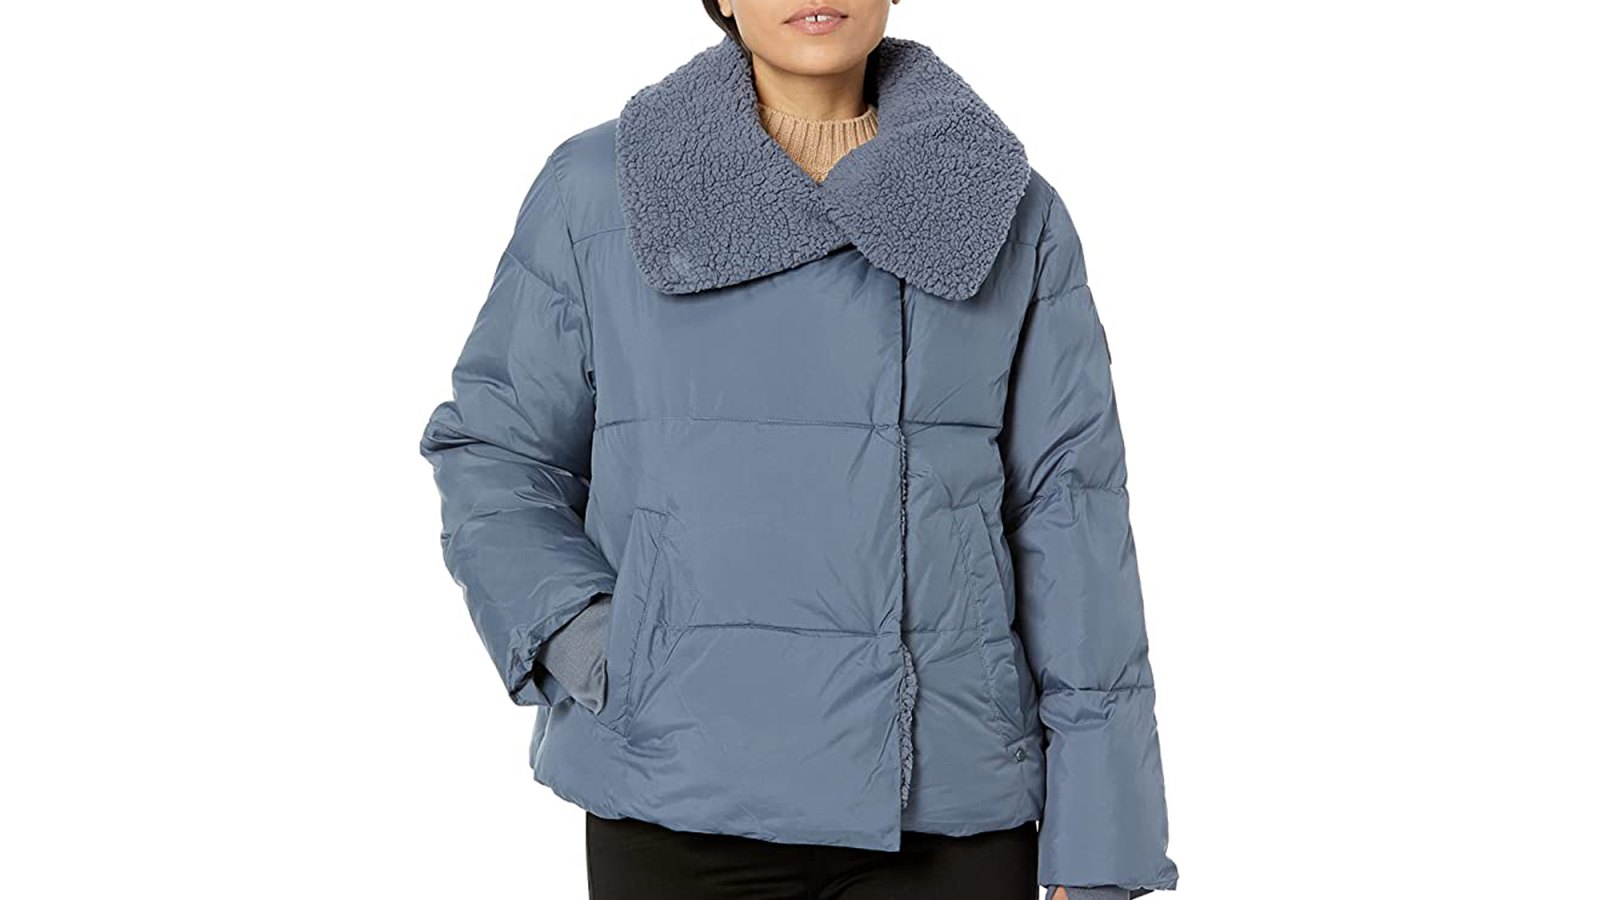 UGG Women's Patricia Sherpa Lined Puffer